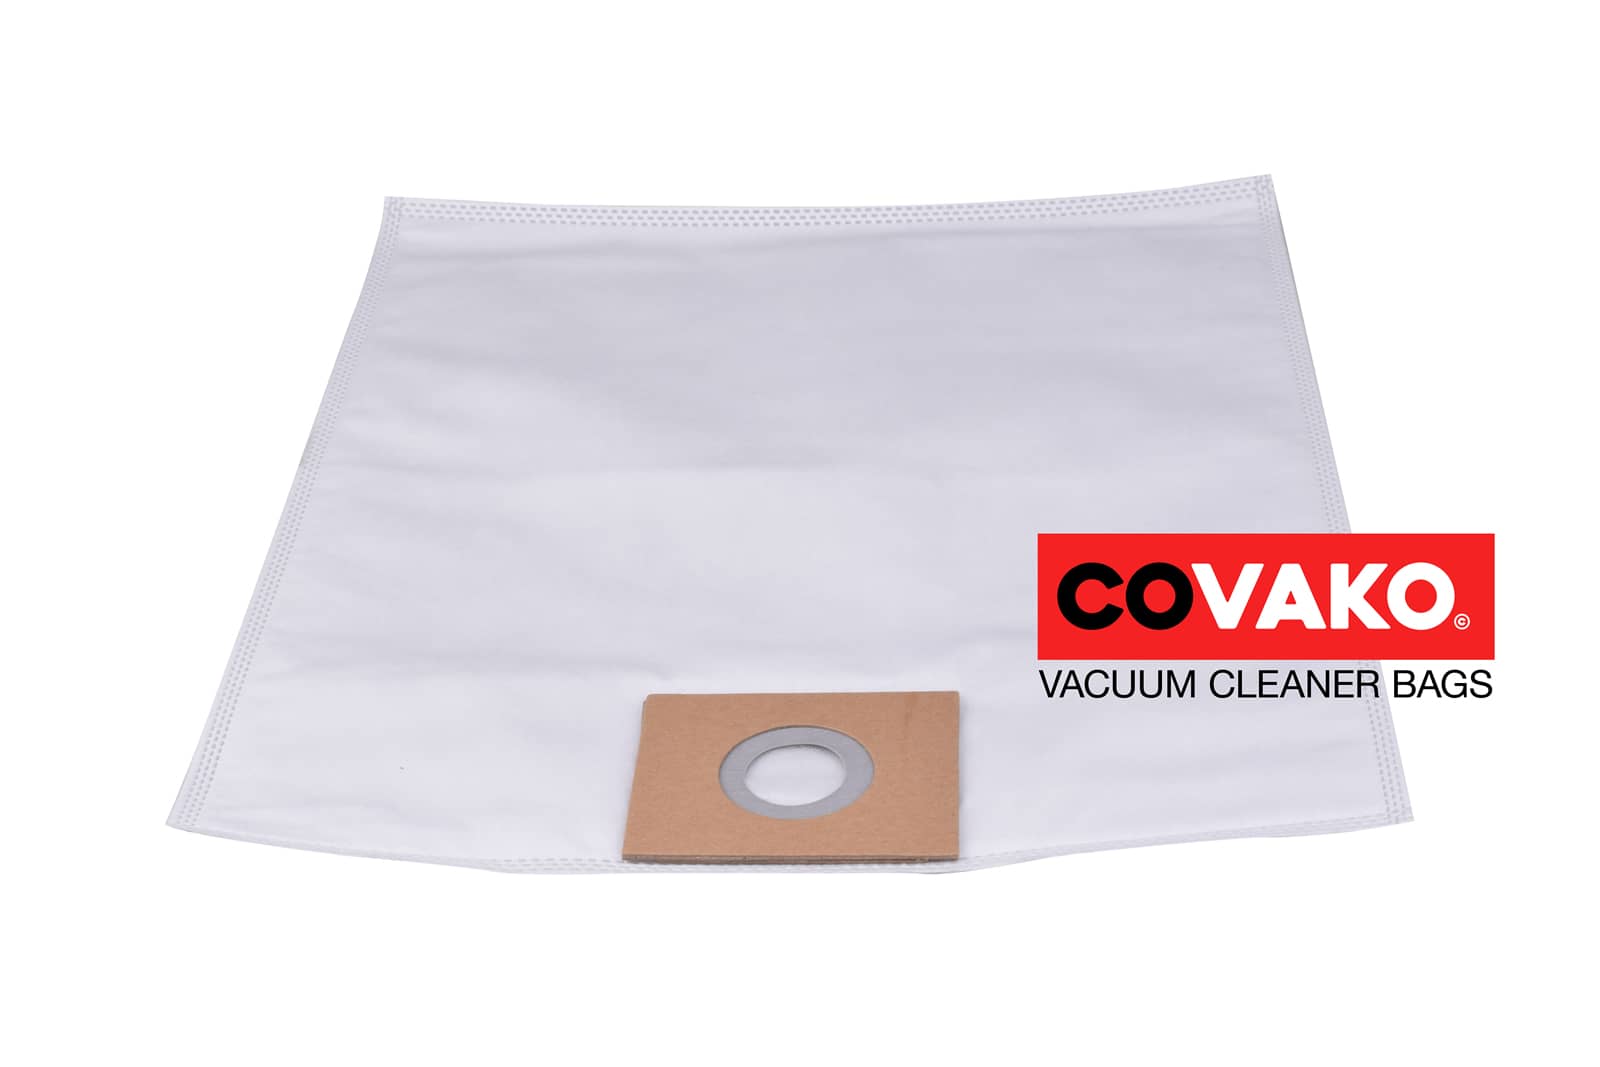 Fimap FV 10 Eco Energy / Synthesis - Fimap vacuum cleaner bags